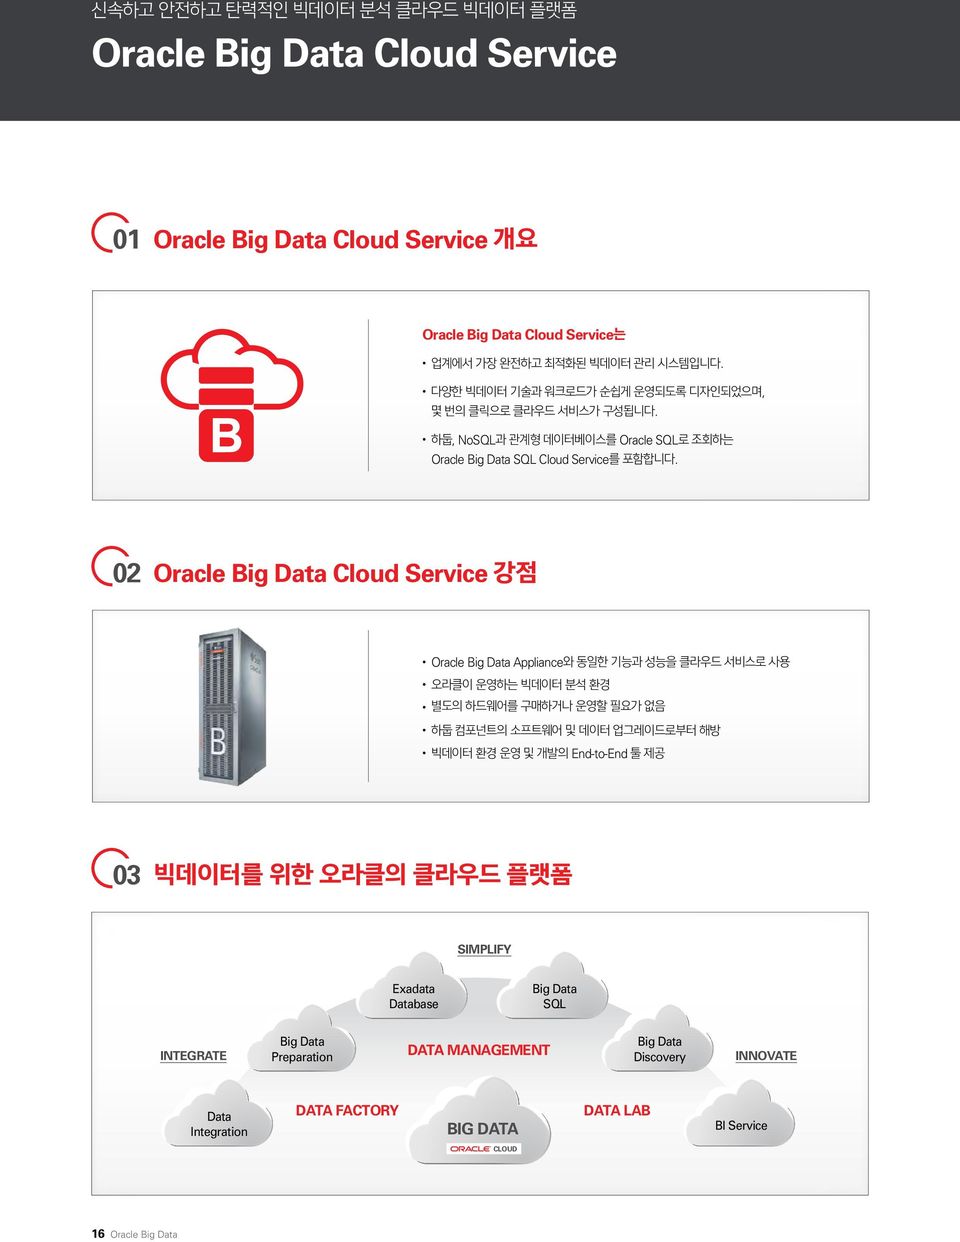 02 Oracle Big Data Cloud Service Oracle Big Data Appliance End-to-End 03 SIMPLIFY Exadata Database Big